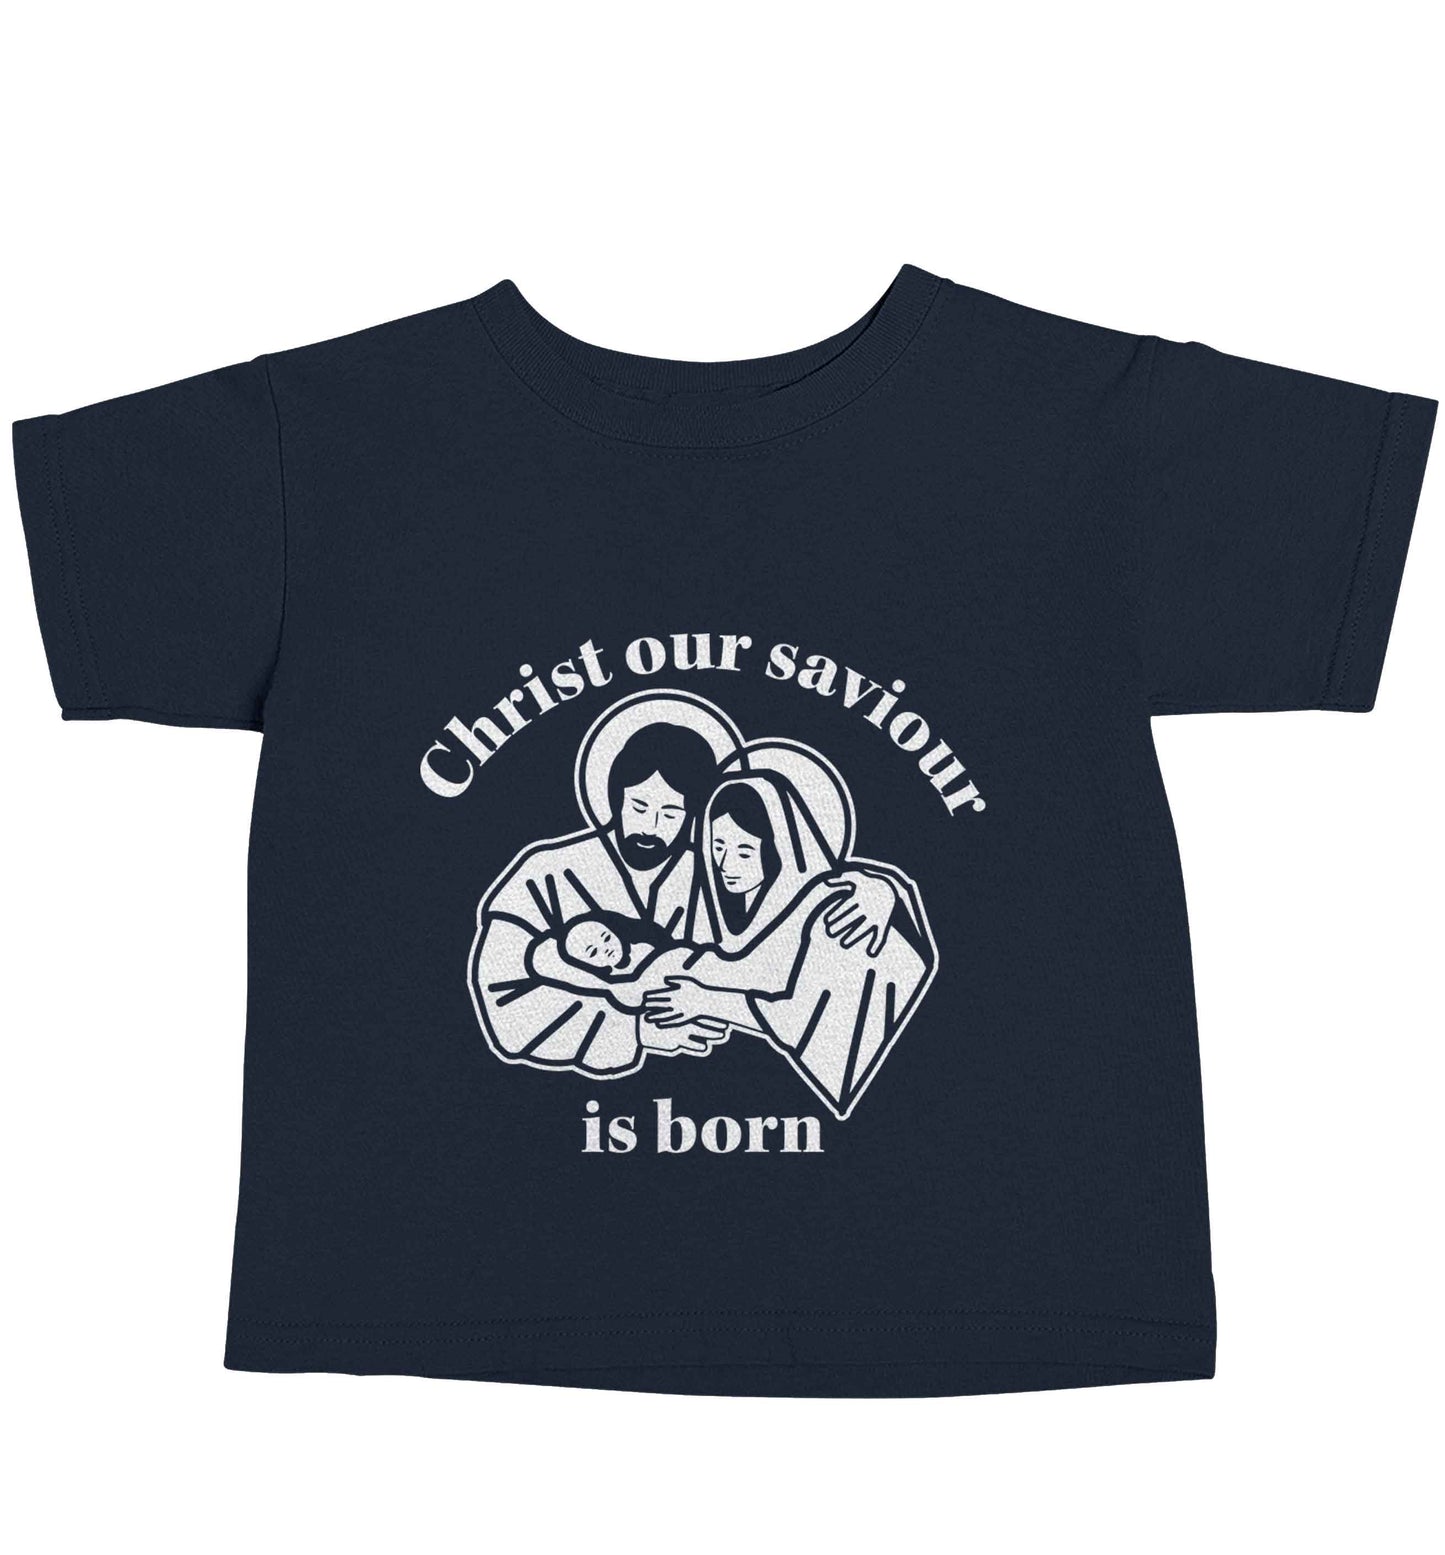 Christ our saviour is born navy baby toddler Tshirt 2 Years